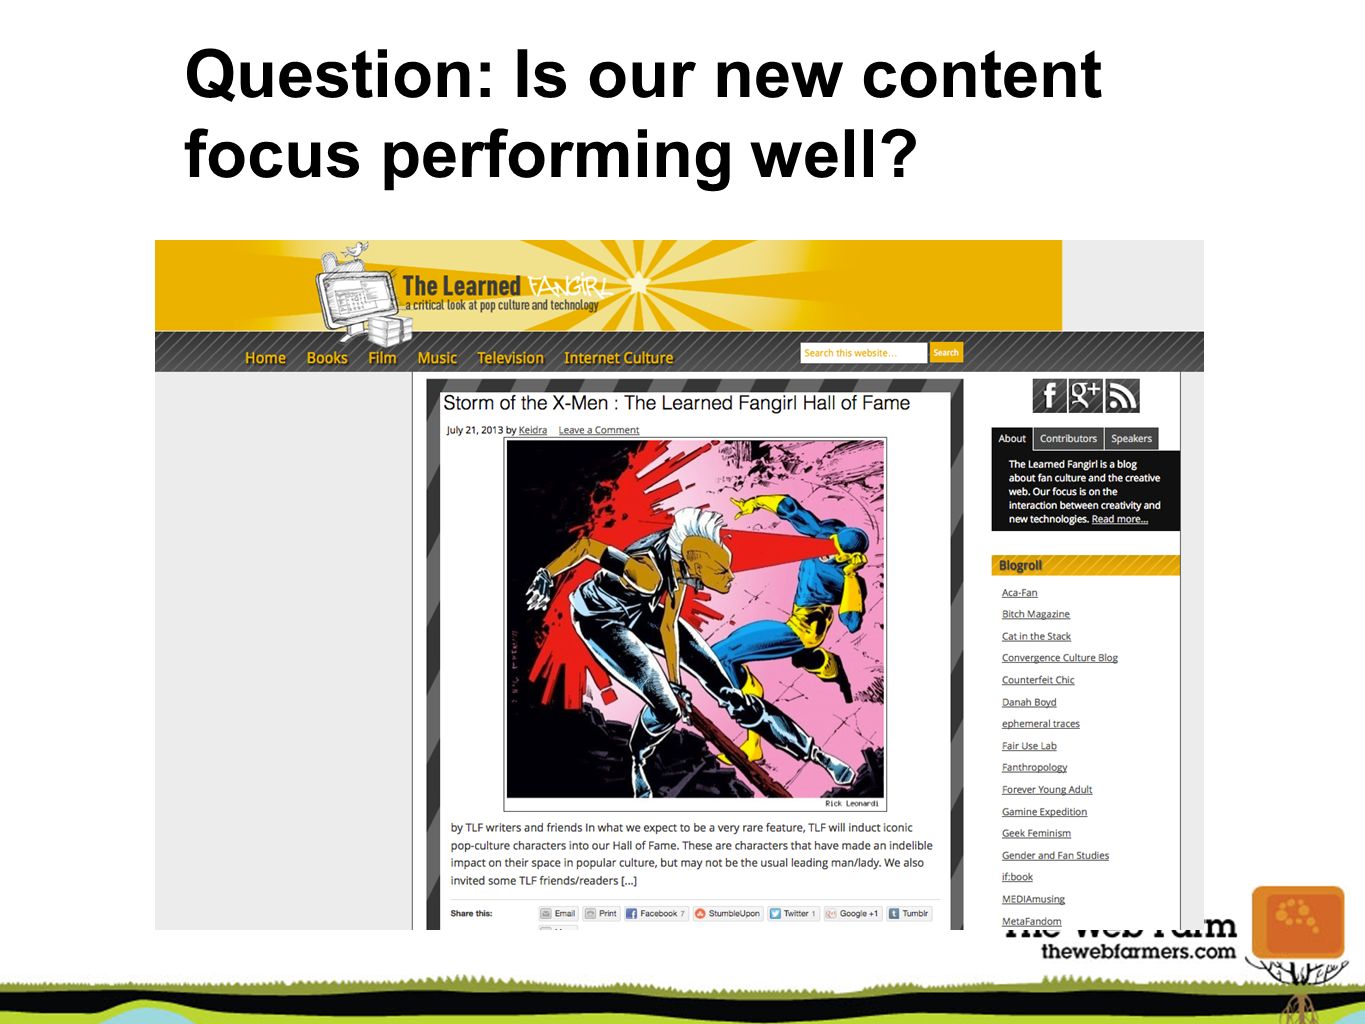 Question: Is our new content focus performing well